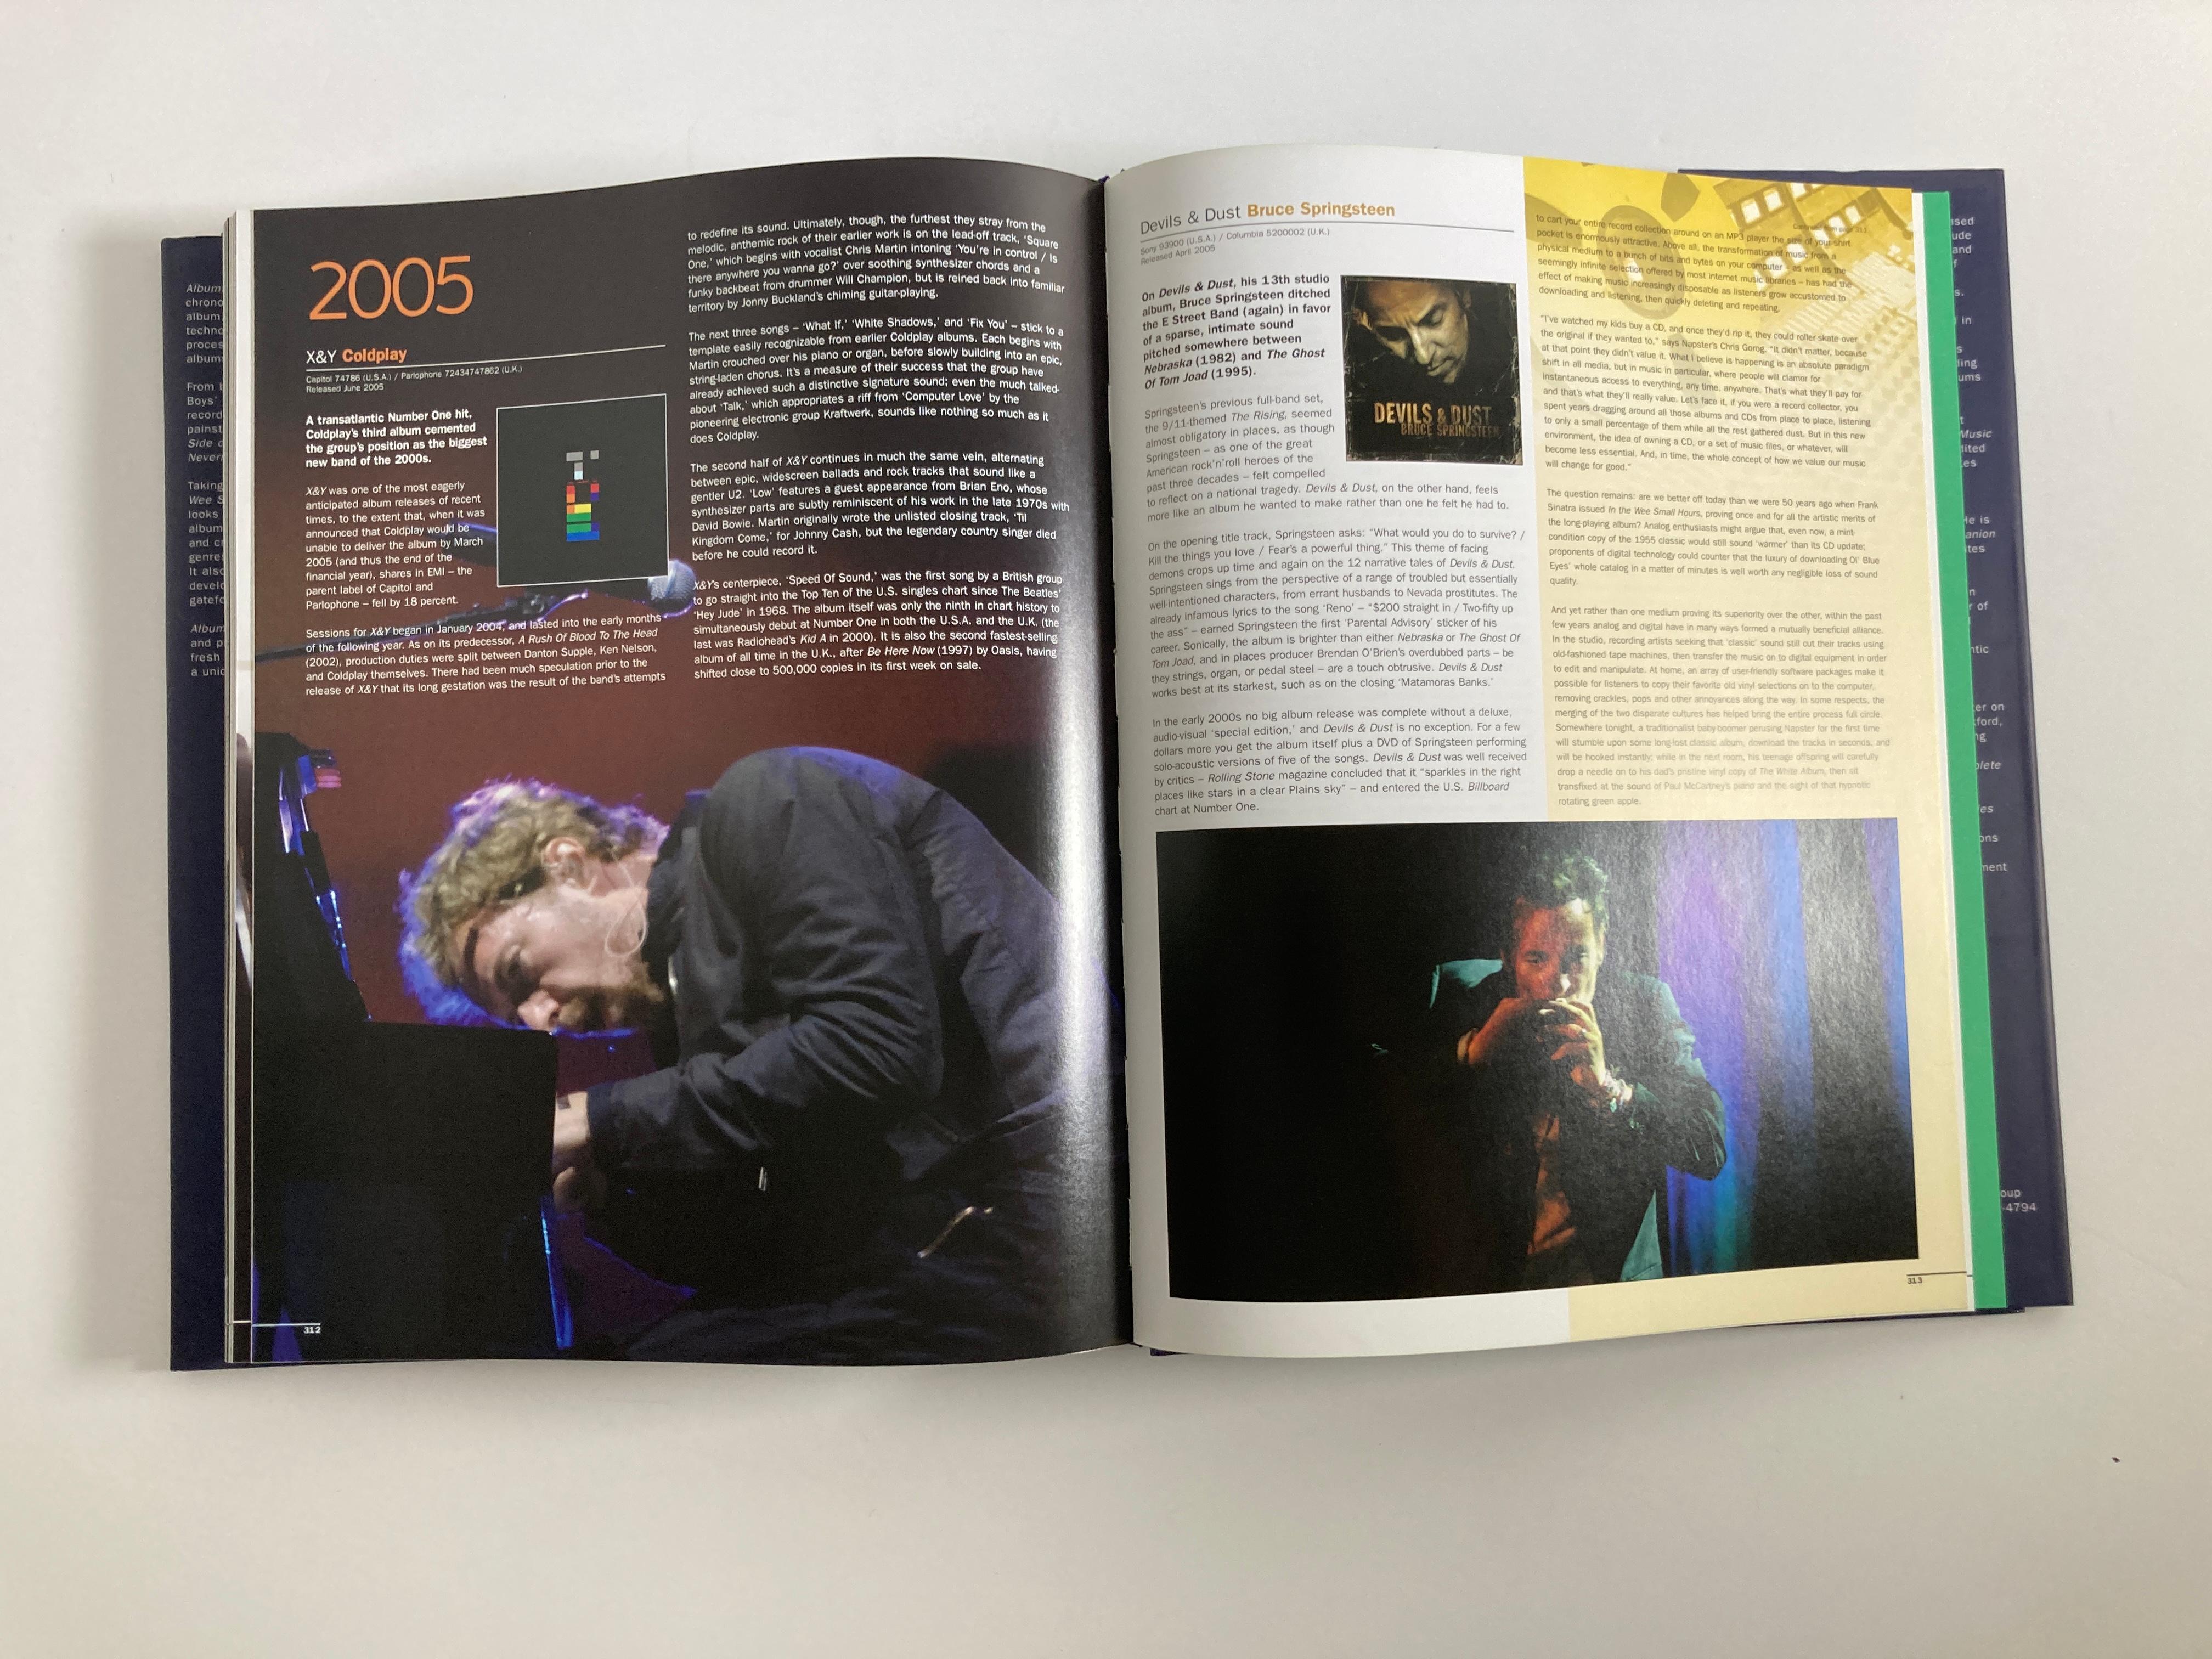 The Stories Behind 50 Years of Great Recordings Hardcover Table Book 4